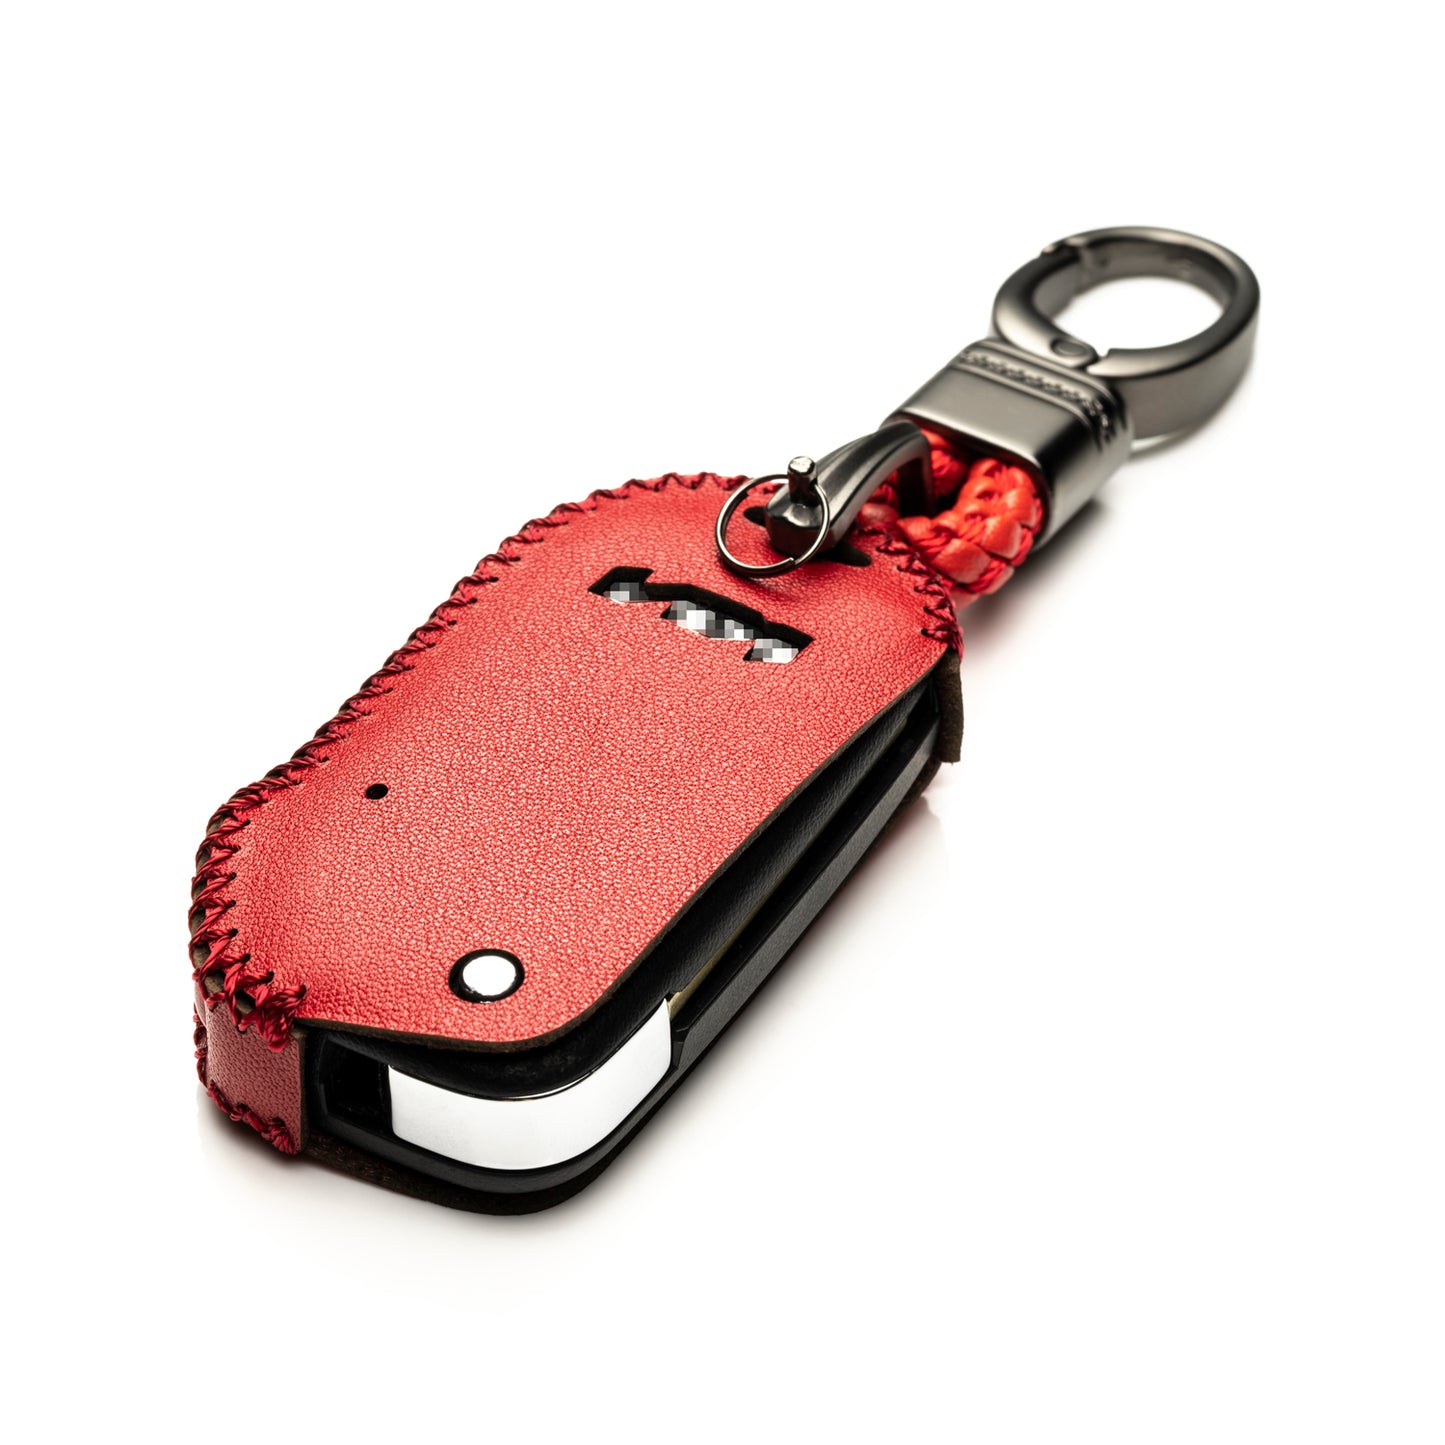 Vitodeco 4-Button Genuine Leather Flip Key Fob Case Cover Compatible with KIA New Emblem 2021-2024